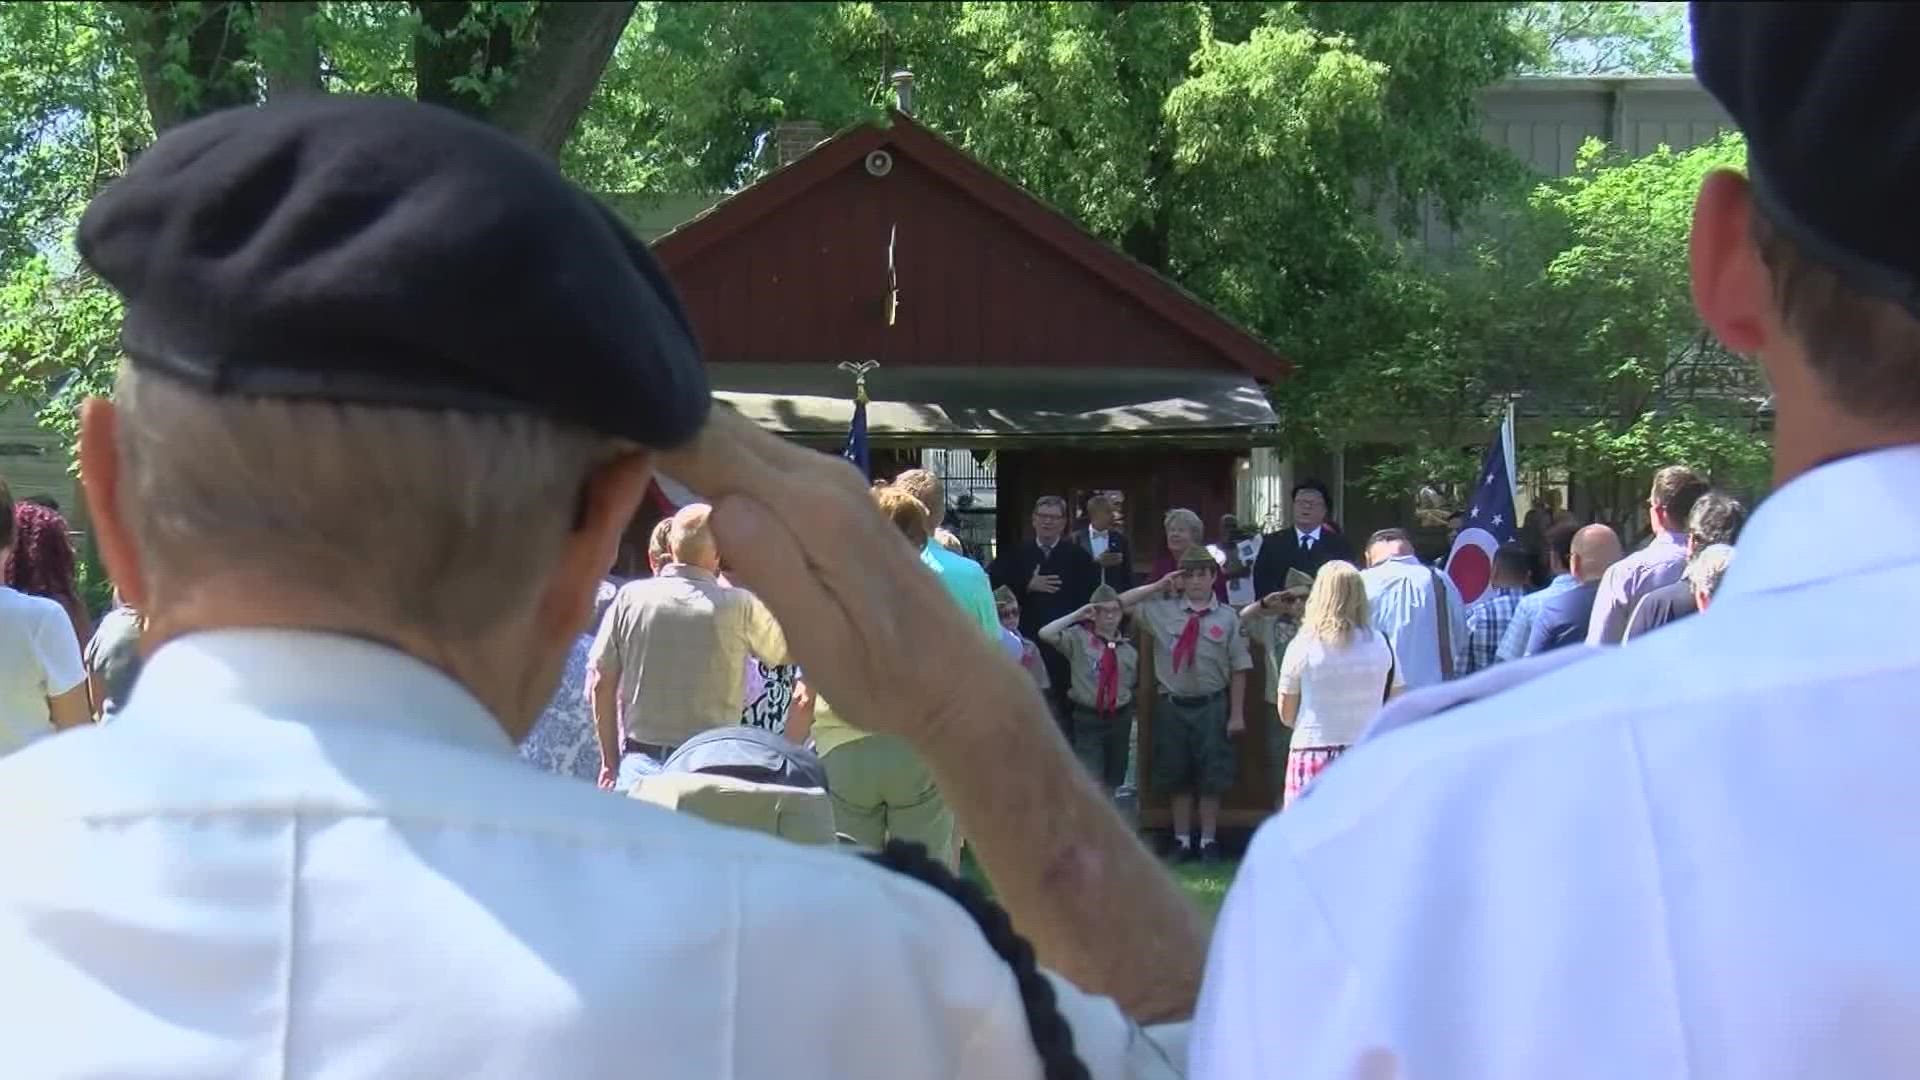 Dozens of new American citizens were honored ahead of Independence Day over the weekend.